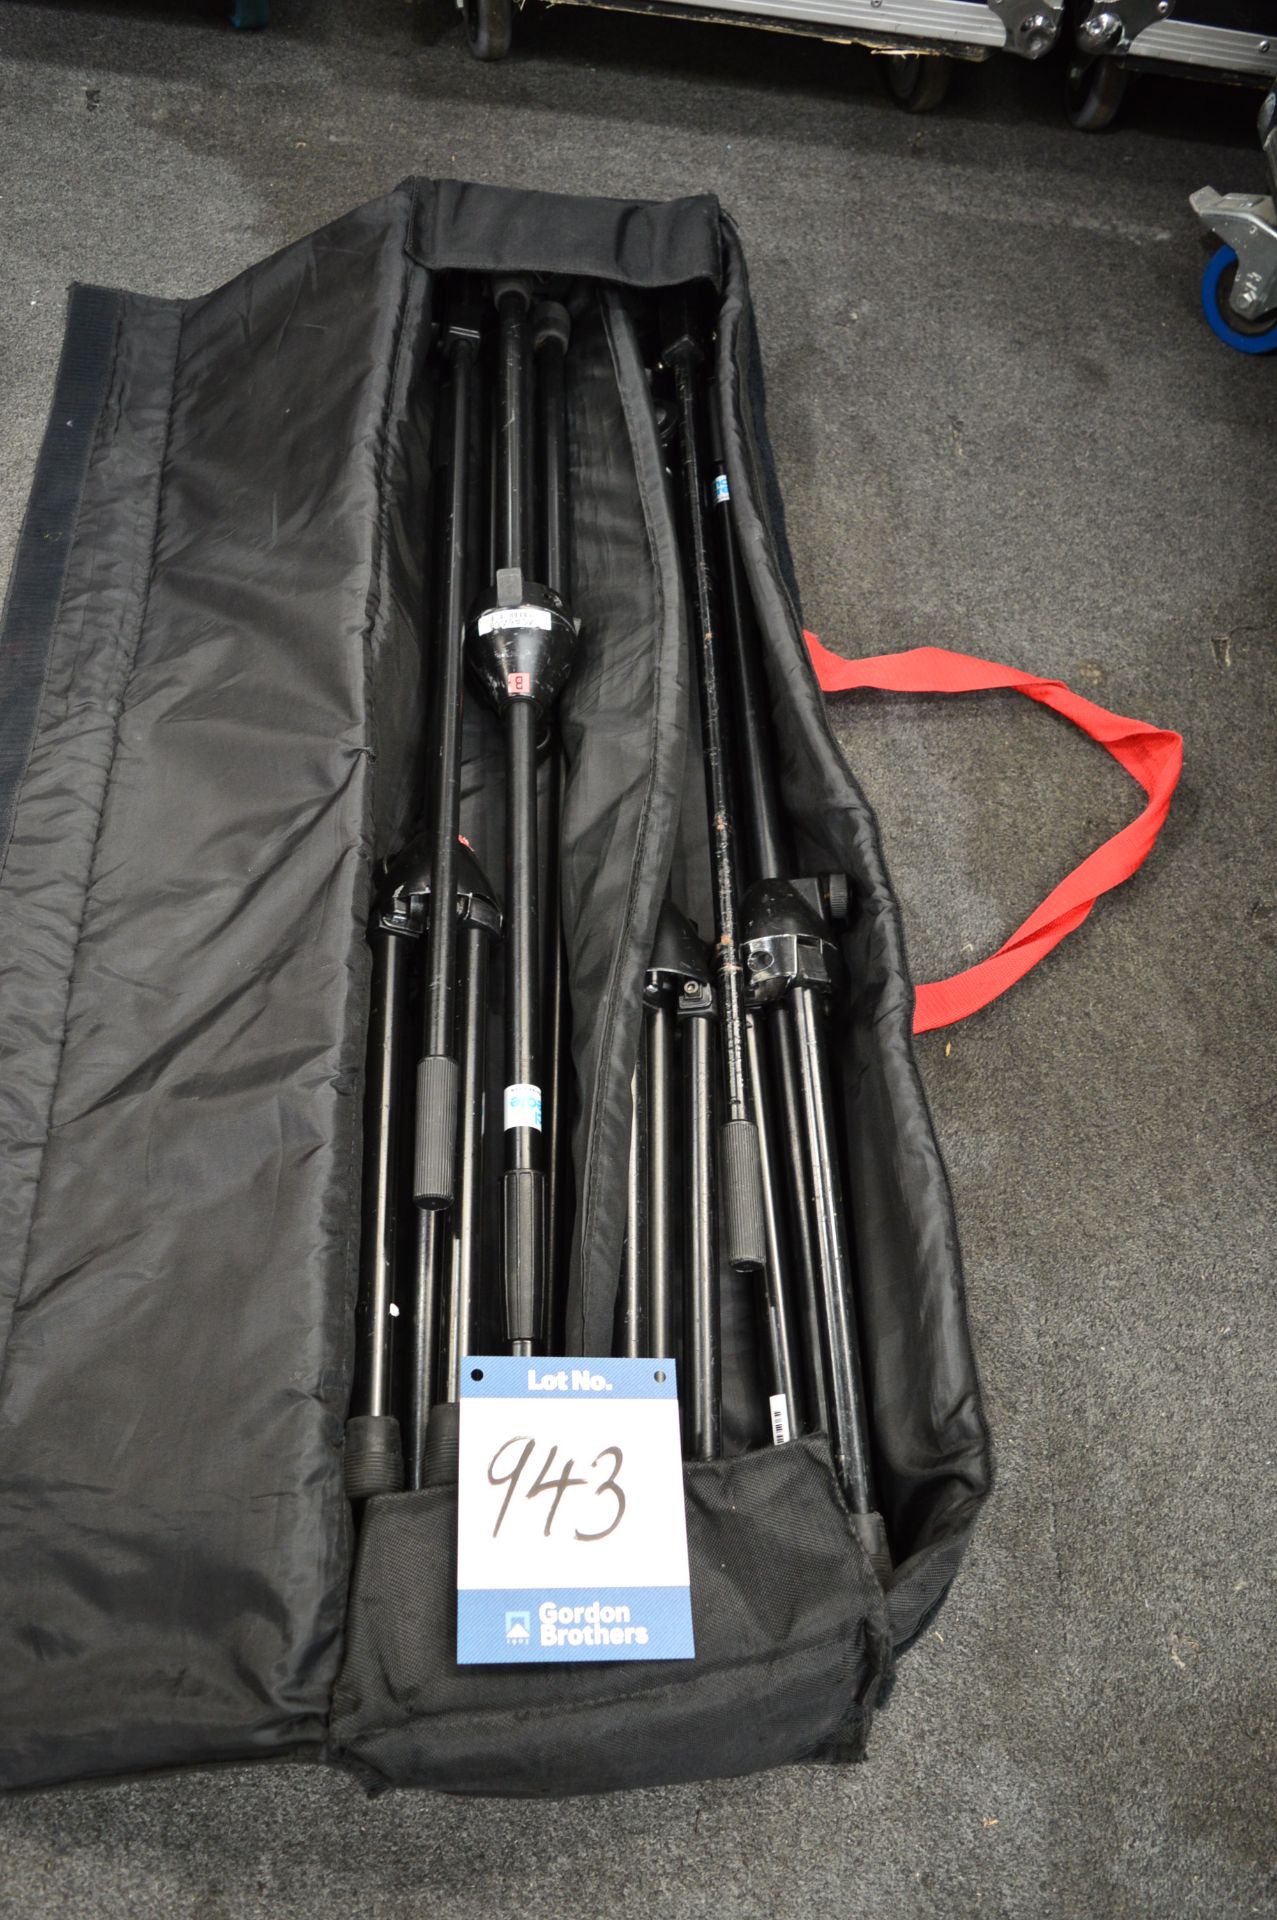 4x No. Professional boom microphone stands in carr